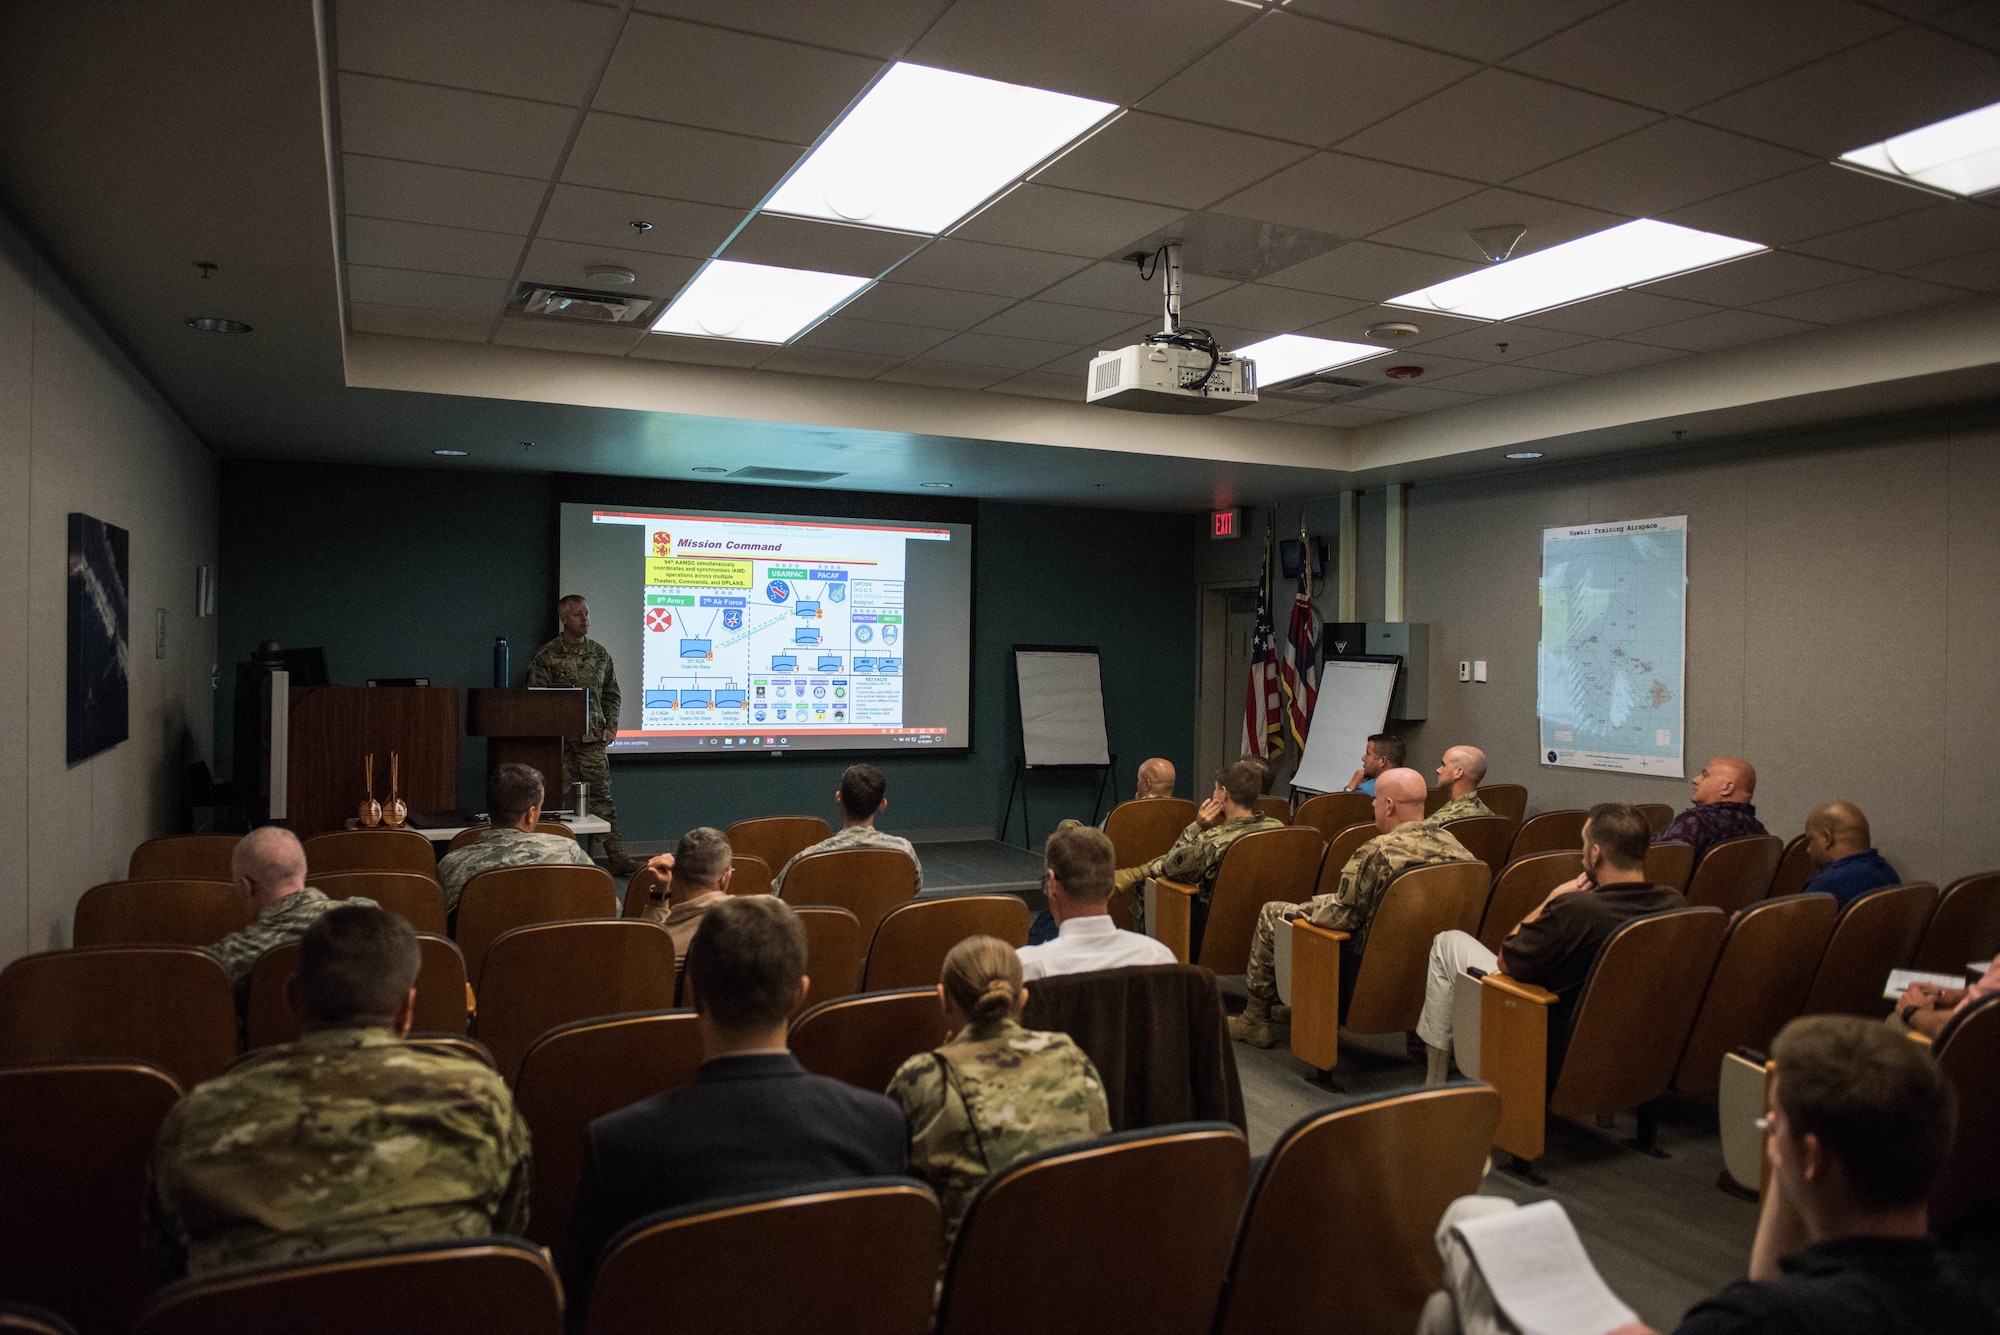 U.S. Army Col. Matt Rauscher, 94th Army Air and Missile Defense Command deputy commander, speaks to participants of the Integrated Air and Missile Defense Center summit, hosted by the Pacific IAMD Center at the Hawaii Air National Guard Headquarters building, Joint Base Pearl Harbor-Hickam, Hawaii, Sept. 10, 2019. During the three-day conference, 30 participants received briefings on regional and global threats, emerging U.S. integrated air and missile defense capabilities, and were updated by the different Integrated Air and Missile Defense Centers around the globe. (U.S. Air Force photo by Staff Sgt. Hailey Haux)